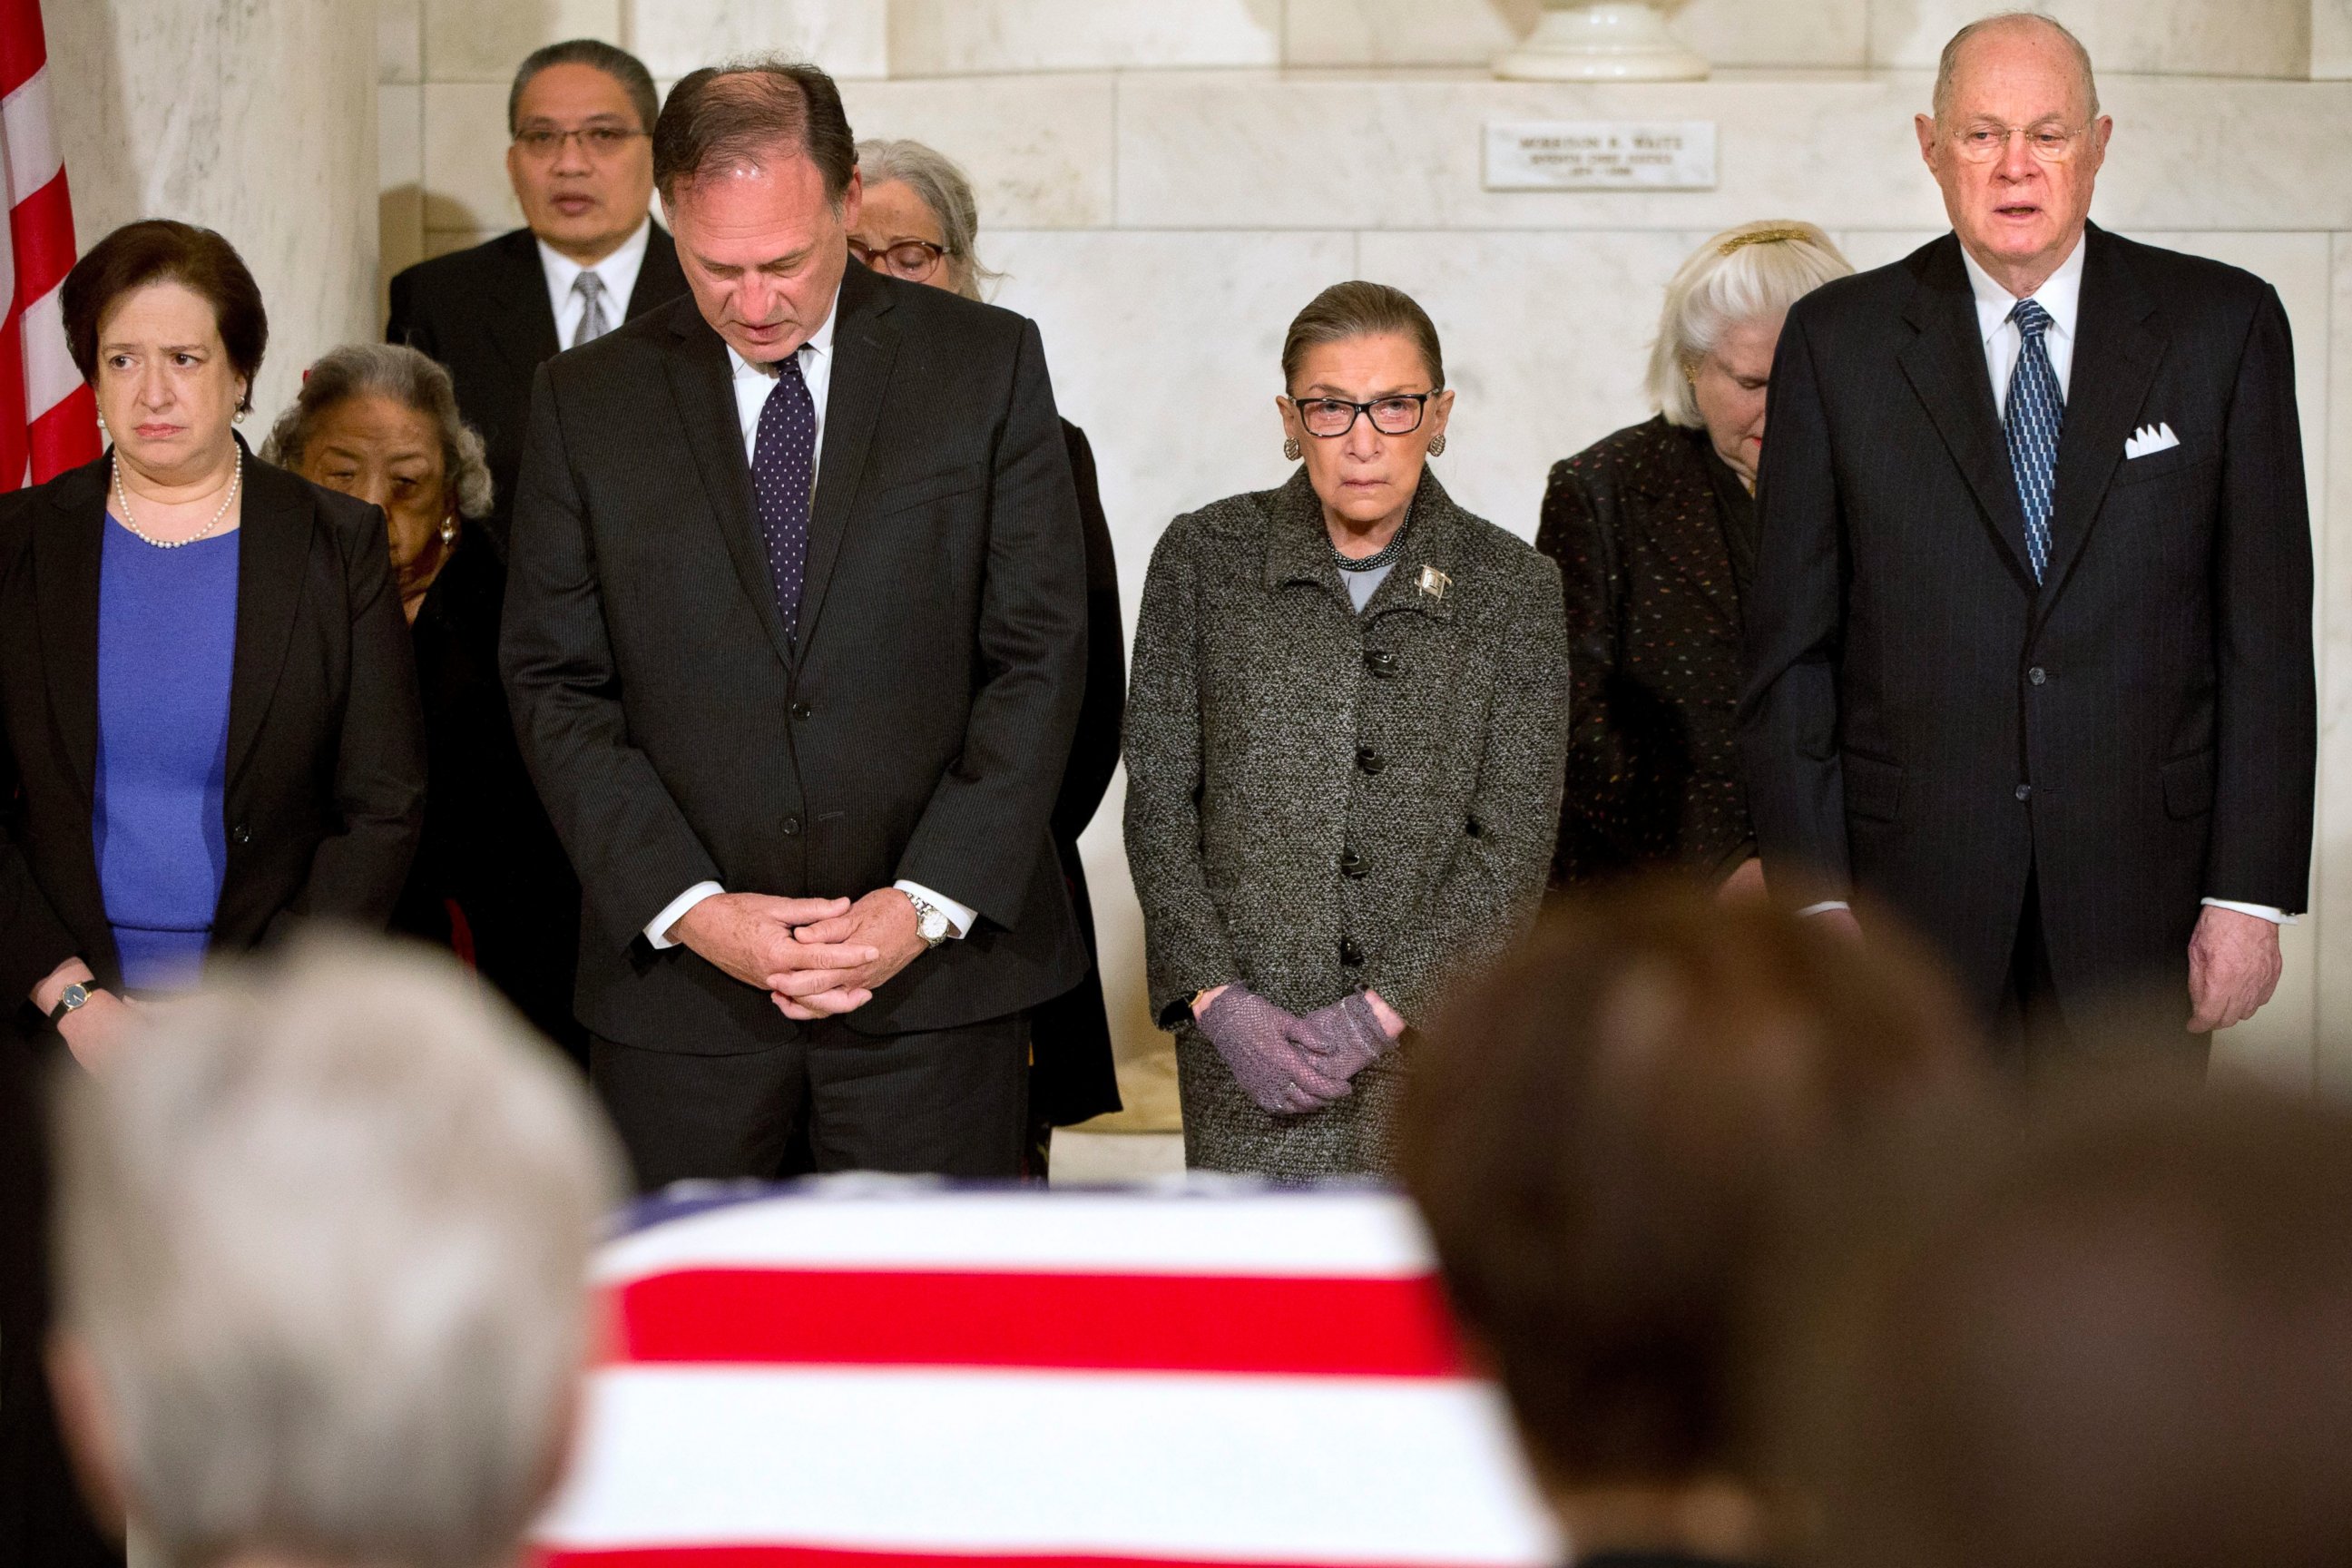 PHOTO: Supreme Court Justices Elena Kagan, Samuel Anthony Alito, Jr., Ruth Bader Ginsburg, and Anthony M. Kennedy are seen in the Great Hall of the Supreme Court where late Supreme Court Justice Antonin Scalia lies in repose in Washington, Feb. 16, 2016.